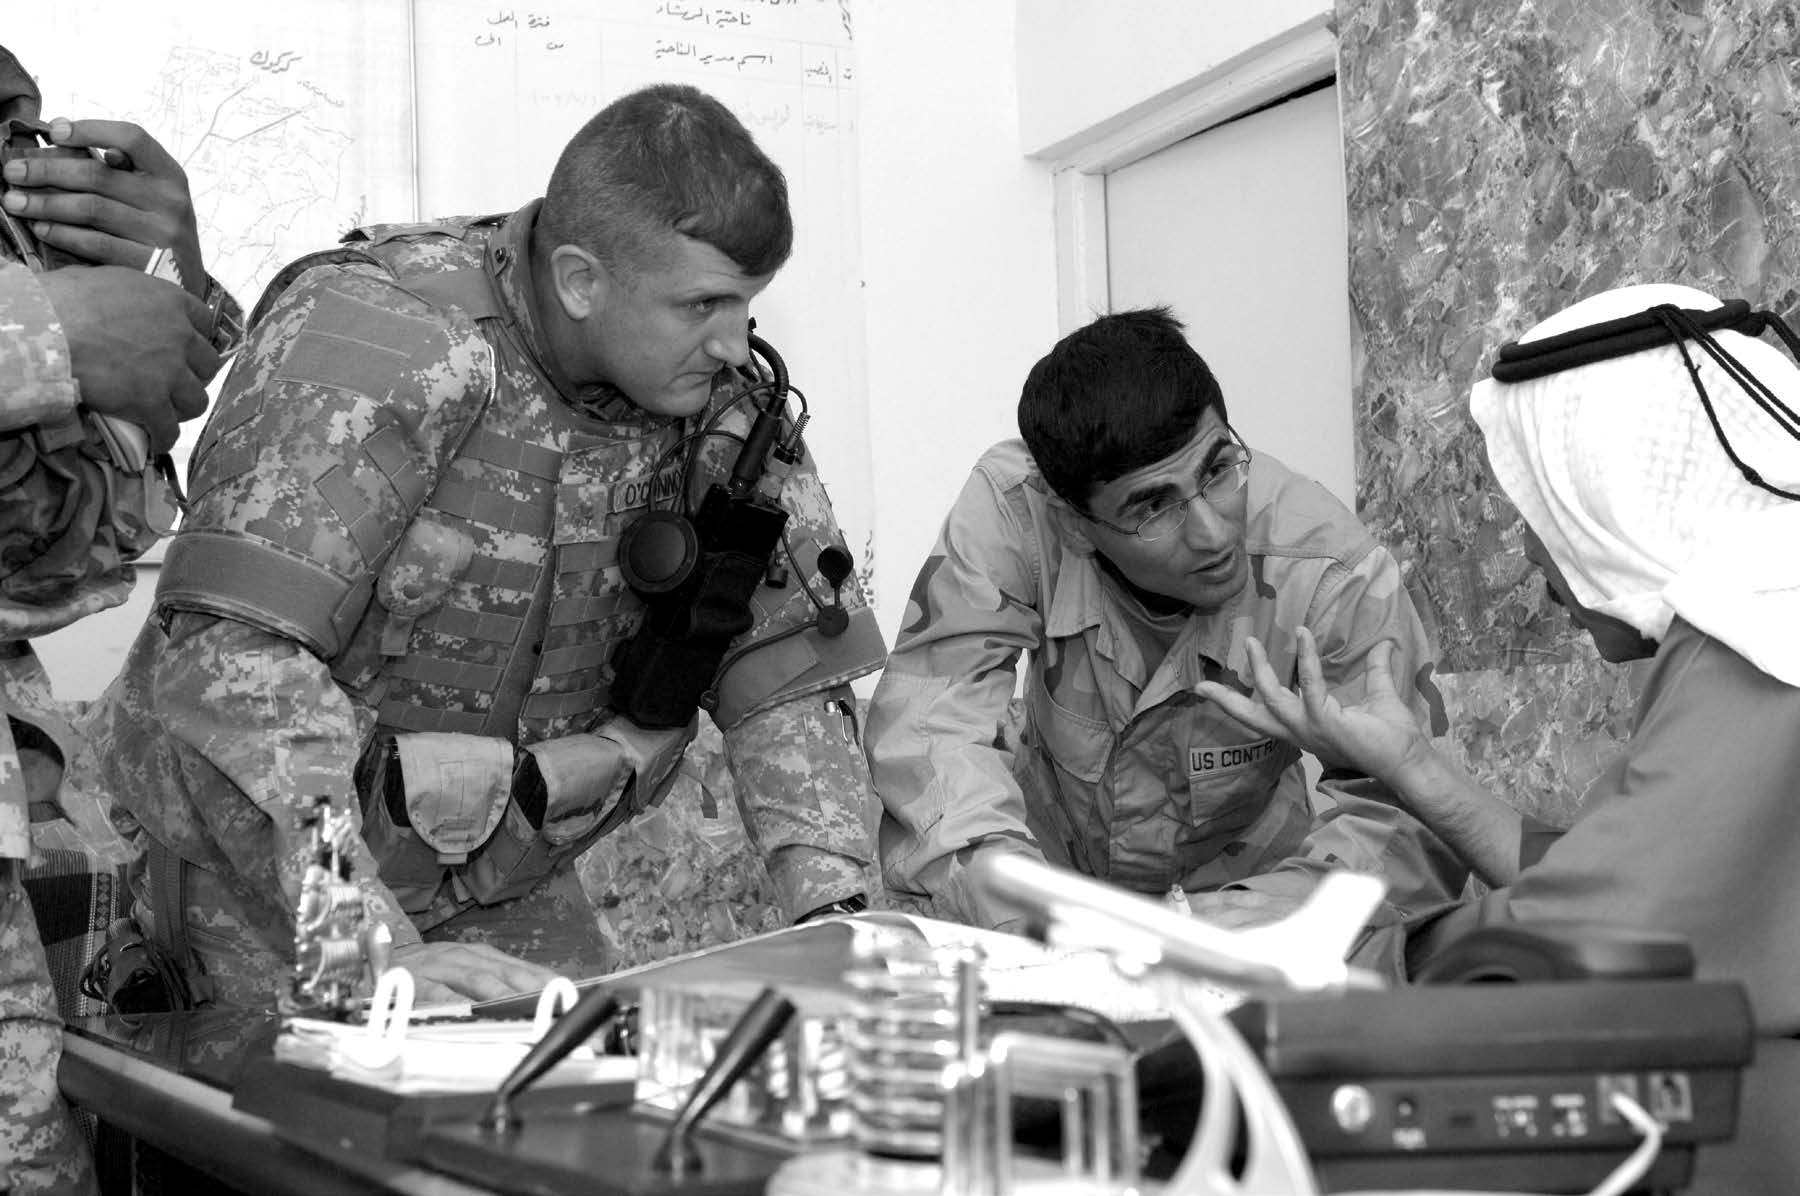 With the assistance of an interpreter, Sheik Luis Fandi Muhammed Salih Al-Obeidi, the mayor of Rashad, Iraq, discusses projects and locations of interest for clean-up efforts with the local U.S. Army commander from the 17th Cavalry Regiment. Courtesy of DoD.